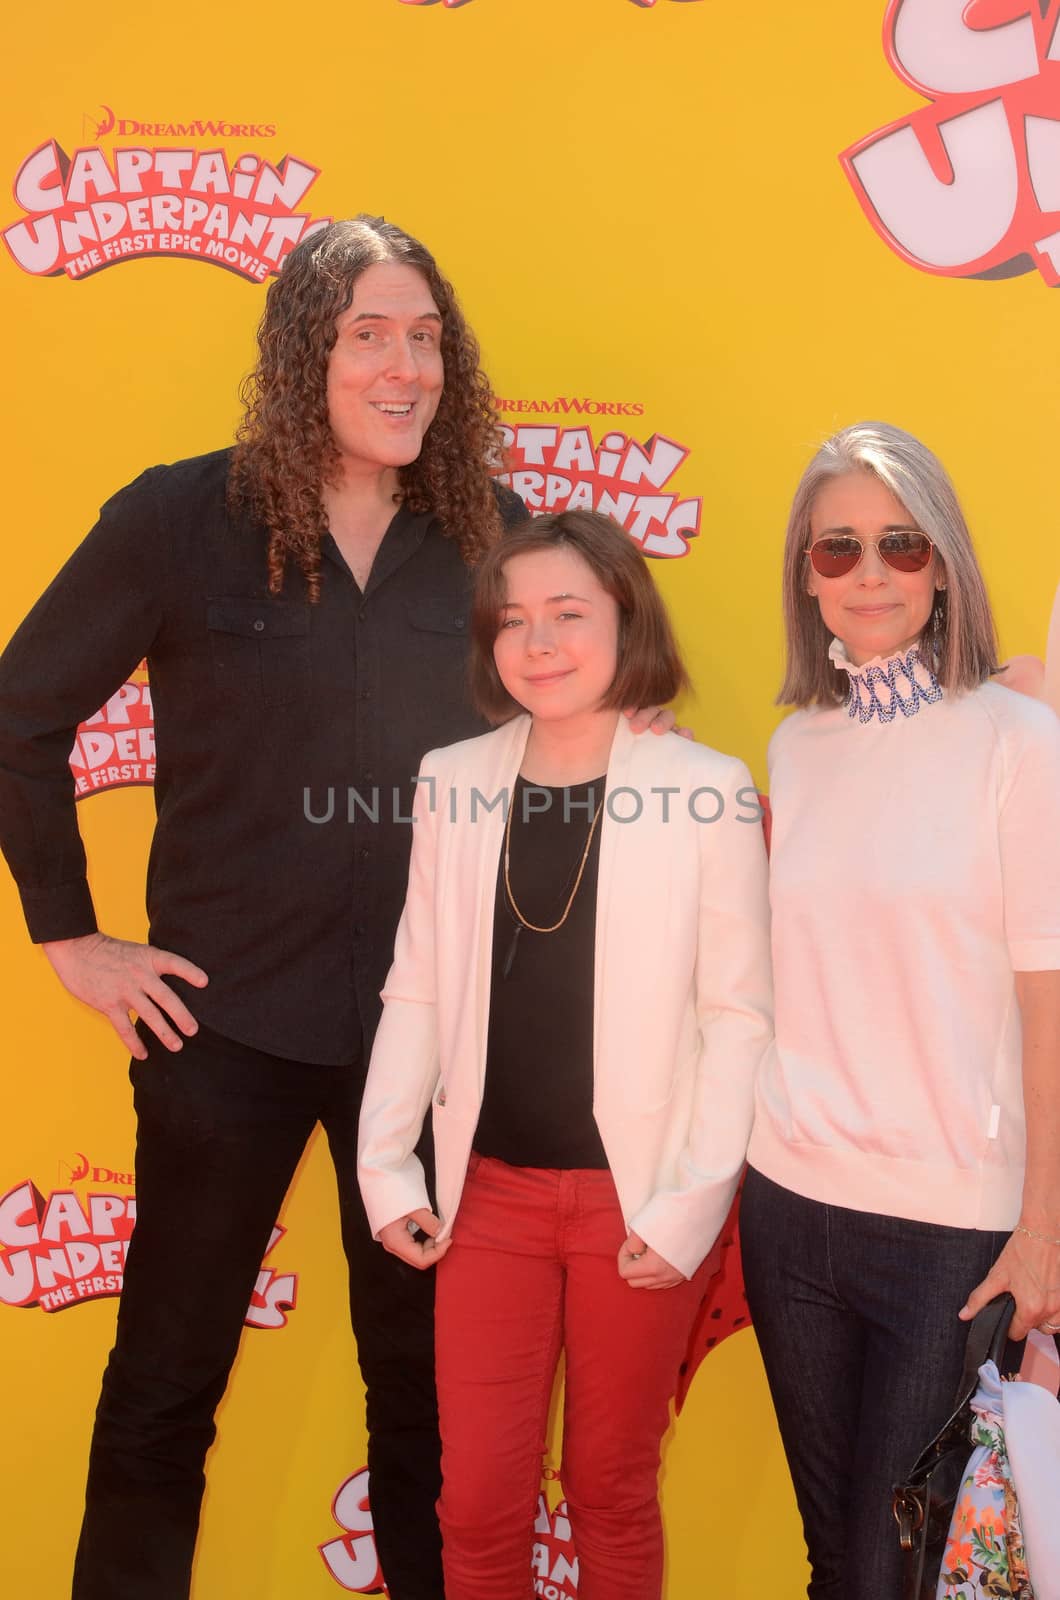 Al Yankovic
at the "Captain Underpants" Los Angeles Premiere, Village Theater, Westwood, CA 05-21-17